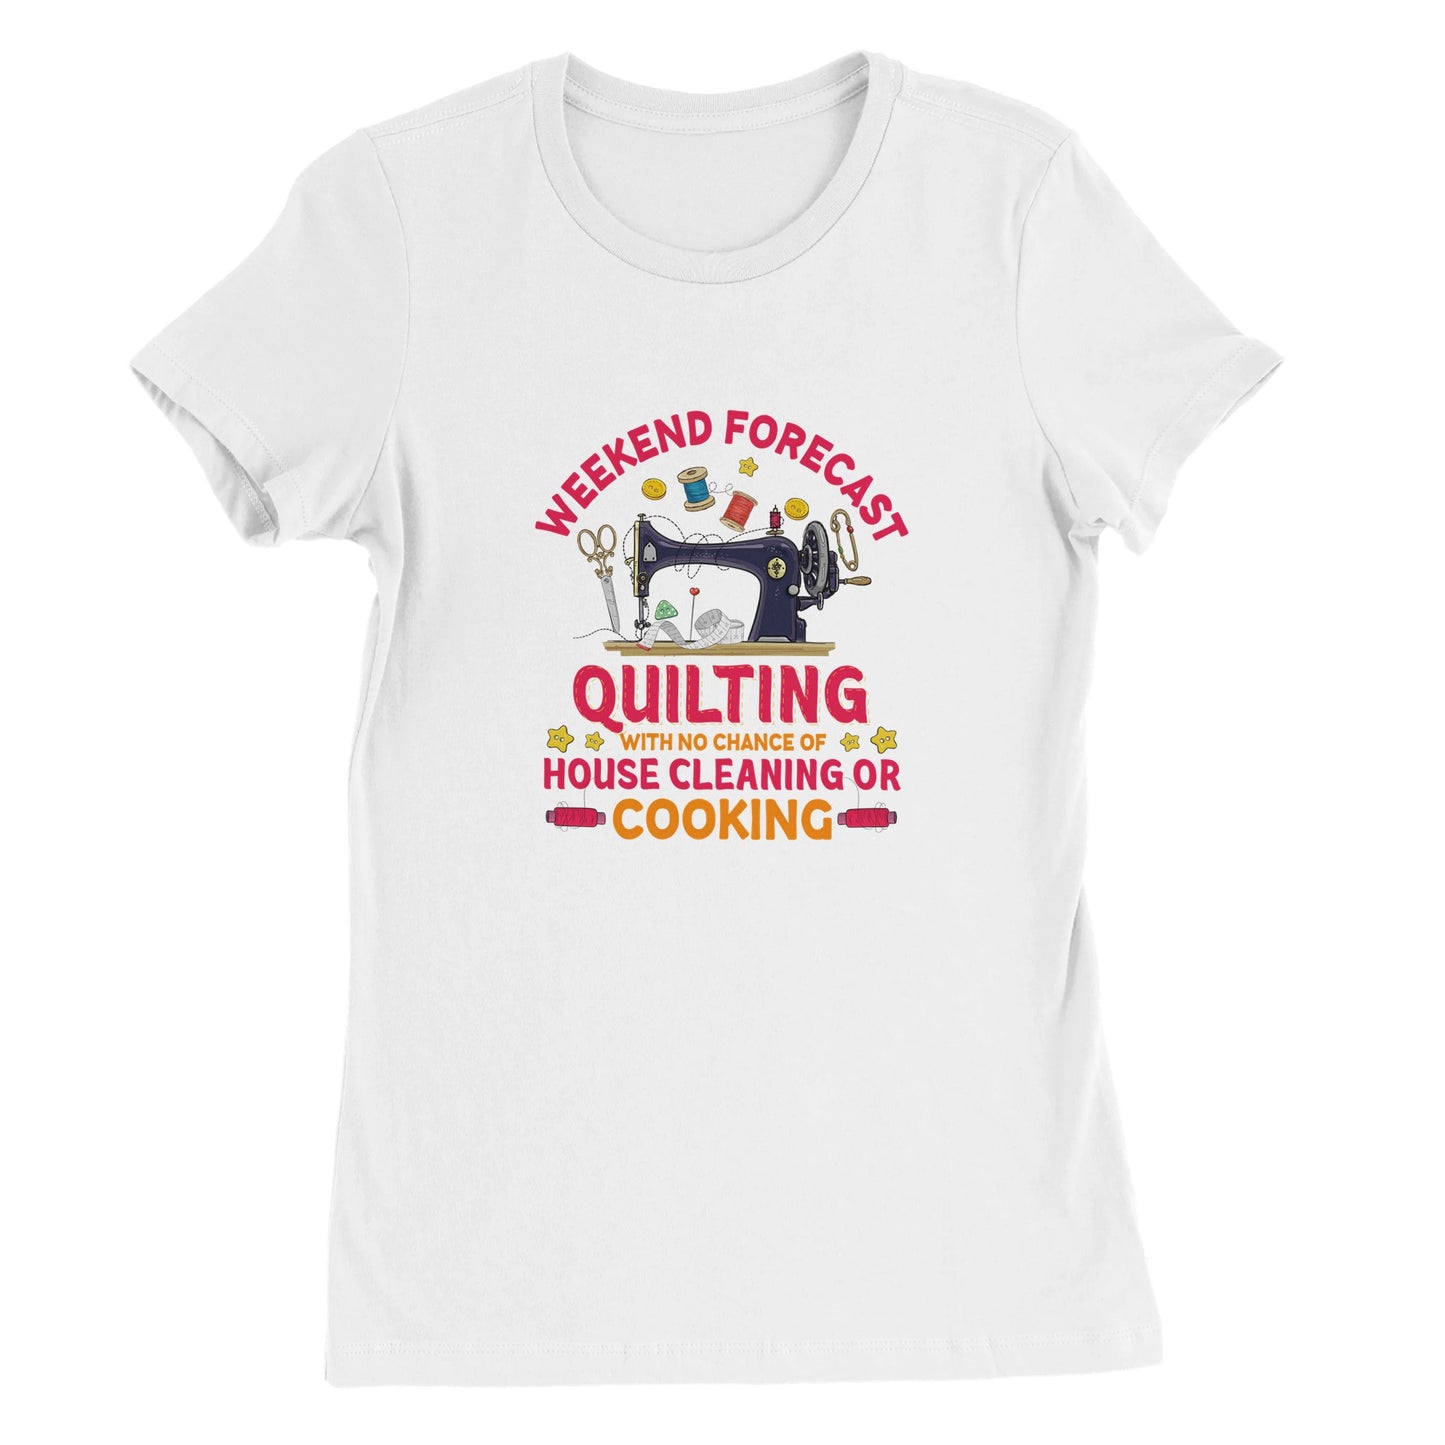 Weekend Forecast Quilting with No Change of House Cleaning or Cooking - Premium Women's Crewneck T-shirt